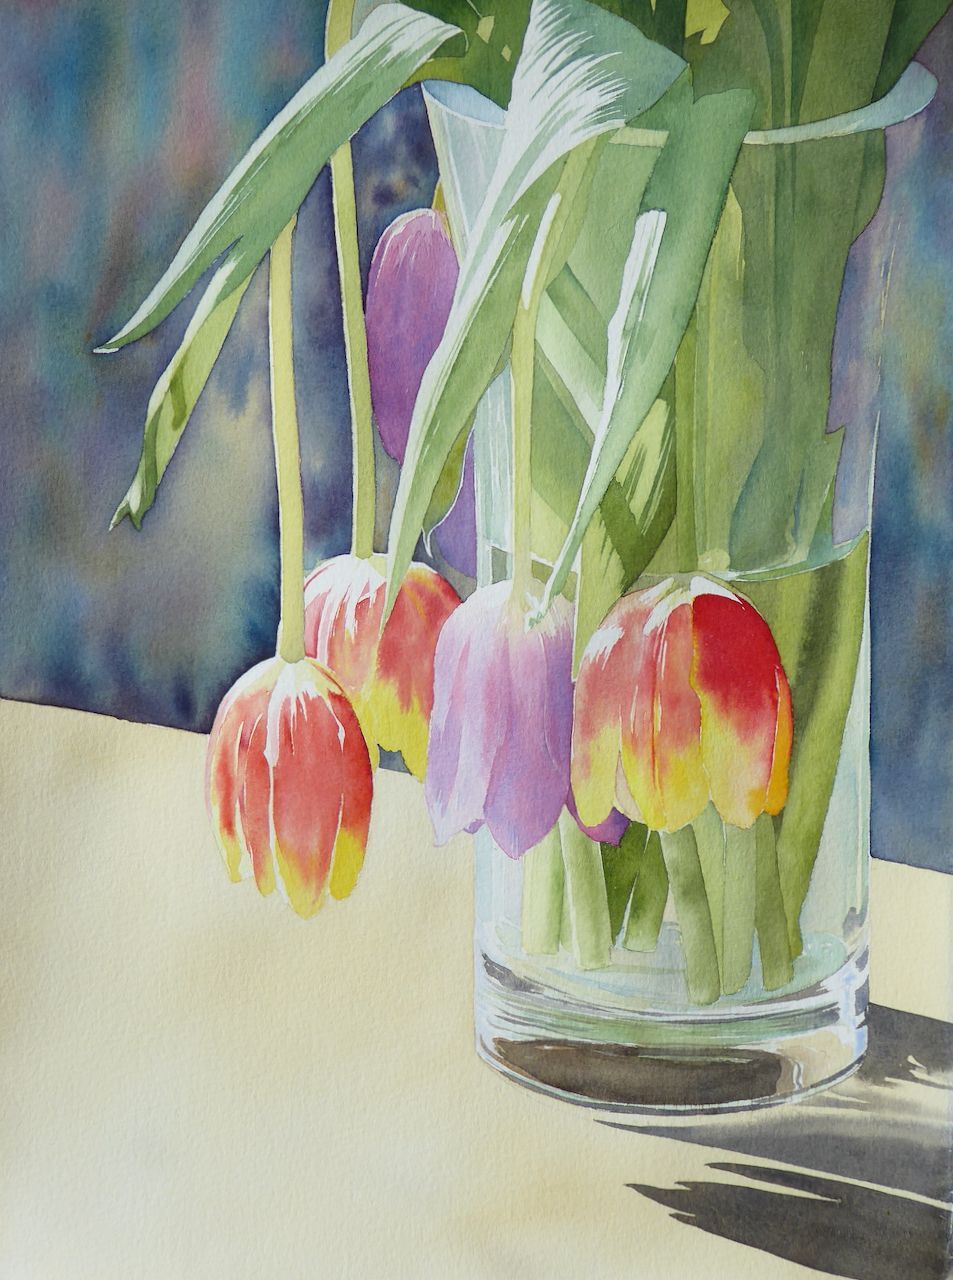 “Tulips” a watercolour painting of vase of tulips by Lesley Linley using A J Ludlow Professional Watercolour